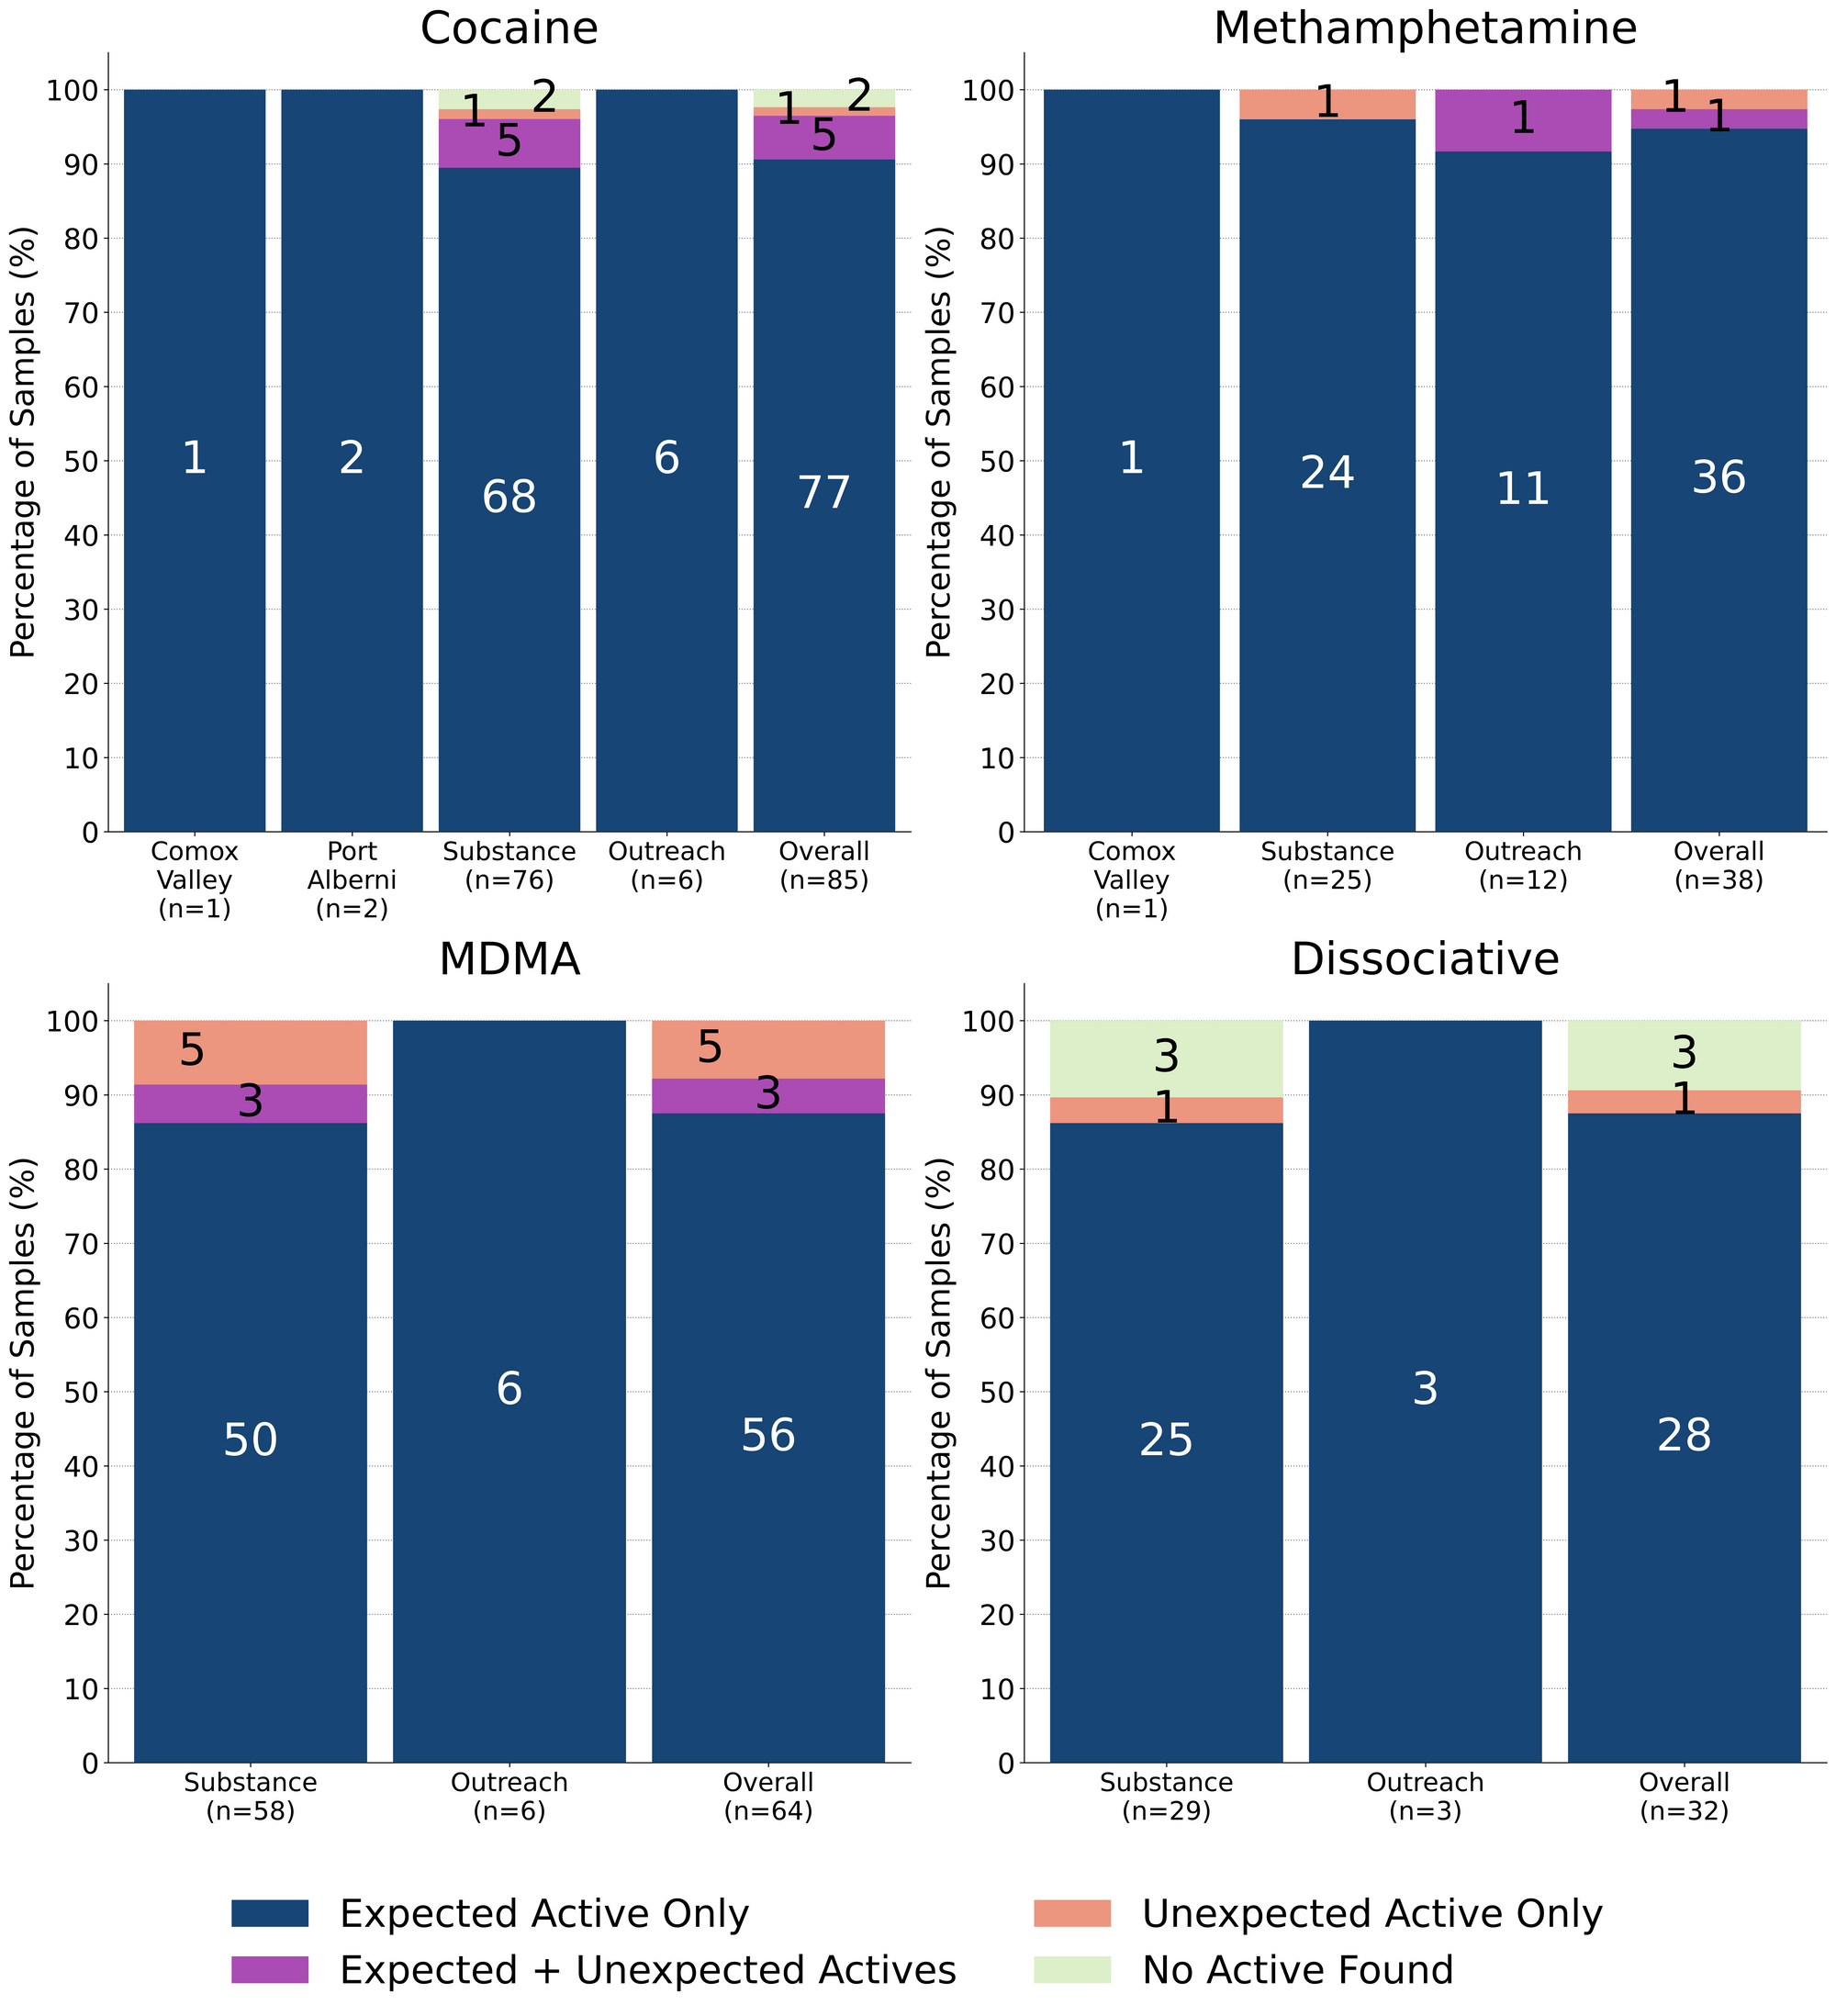 Figure 2. Adulteration breakdown by drug class and sample collection location/method. Bars are stacked by percentage of samples in each category, with the individual sample counts overlaid. Dark Blue regions group samples that were simply as expected with no other notable compounds detected, Magenta shows samples that contained the expected drug and were contaminated with an unexpected active, Salmon groups samples that only contained an unexpected active (the expected drug was not found), and Yellow displays samples where no active compounds were detected.